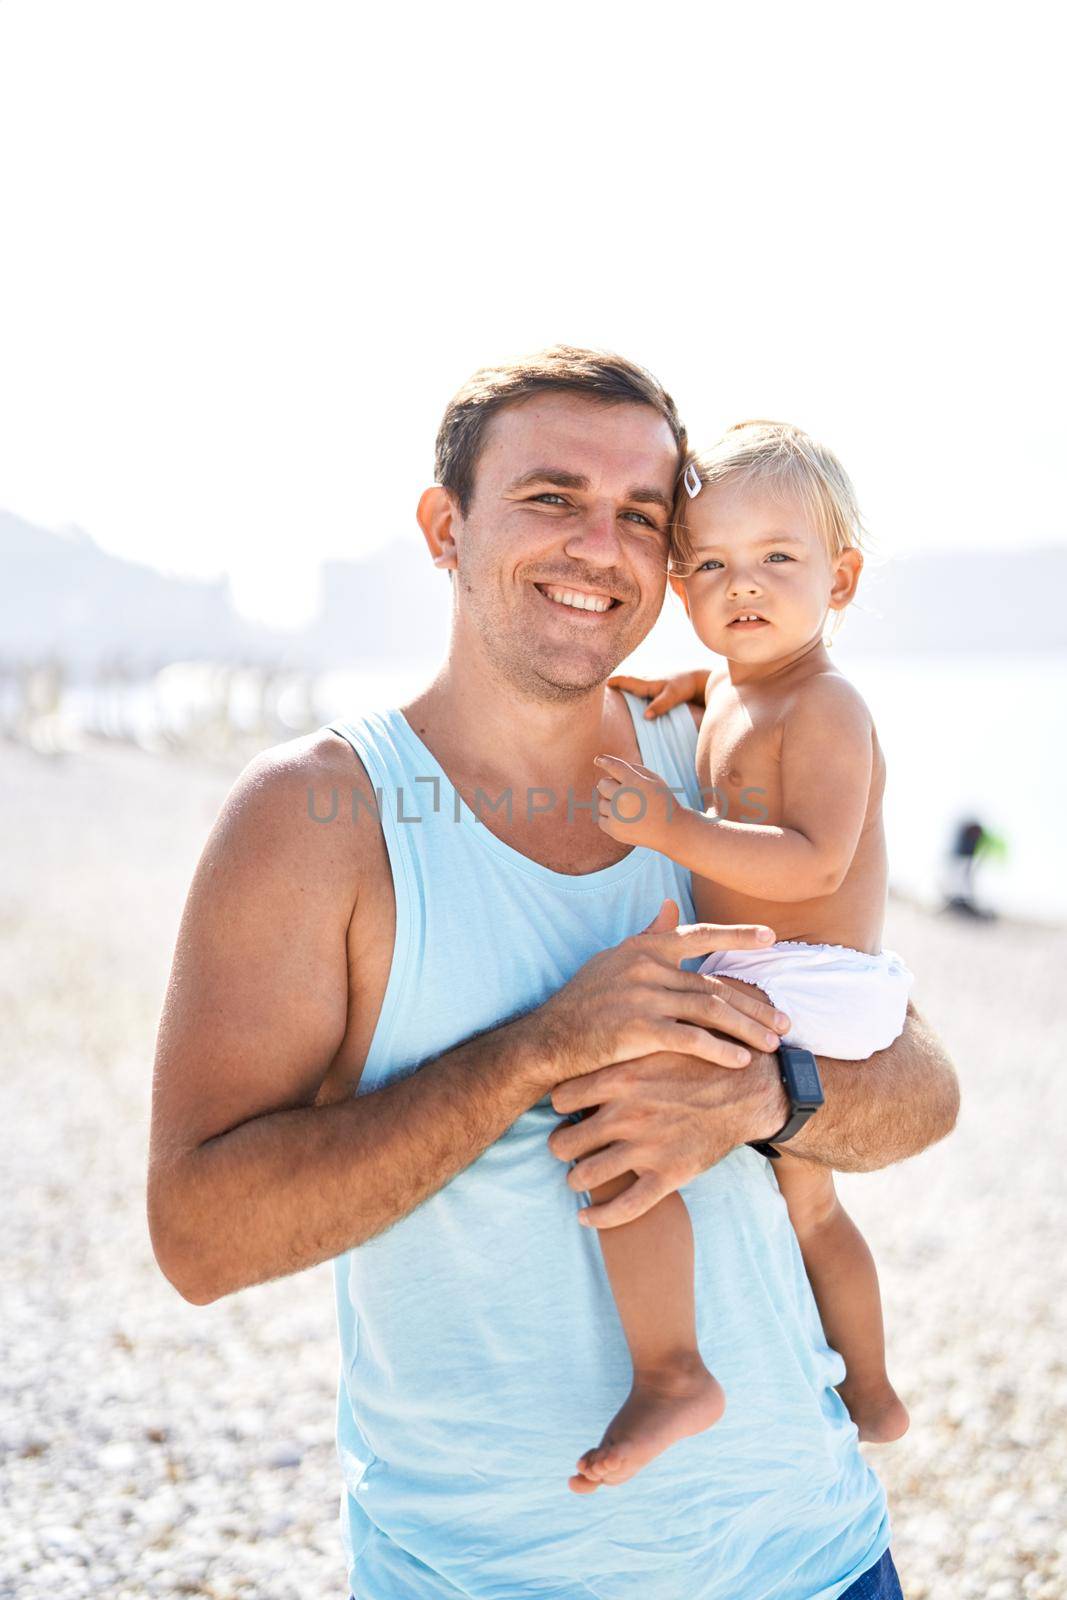 Smiling dad holding little daughter in his arms on the beach. Portrait by Nadtochiy